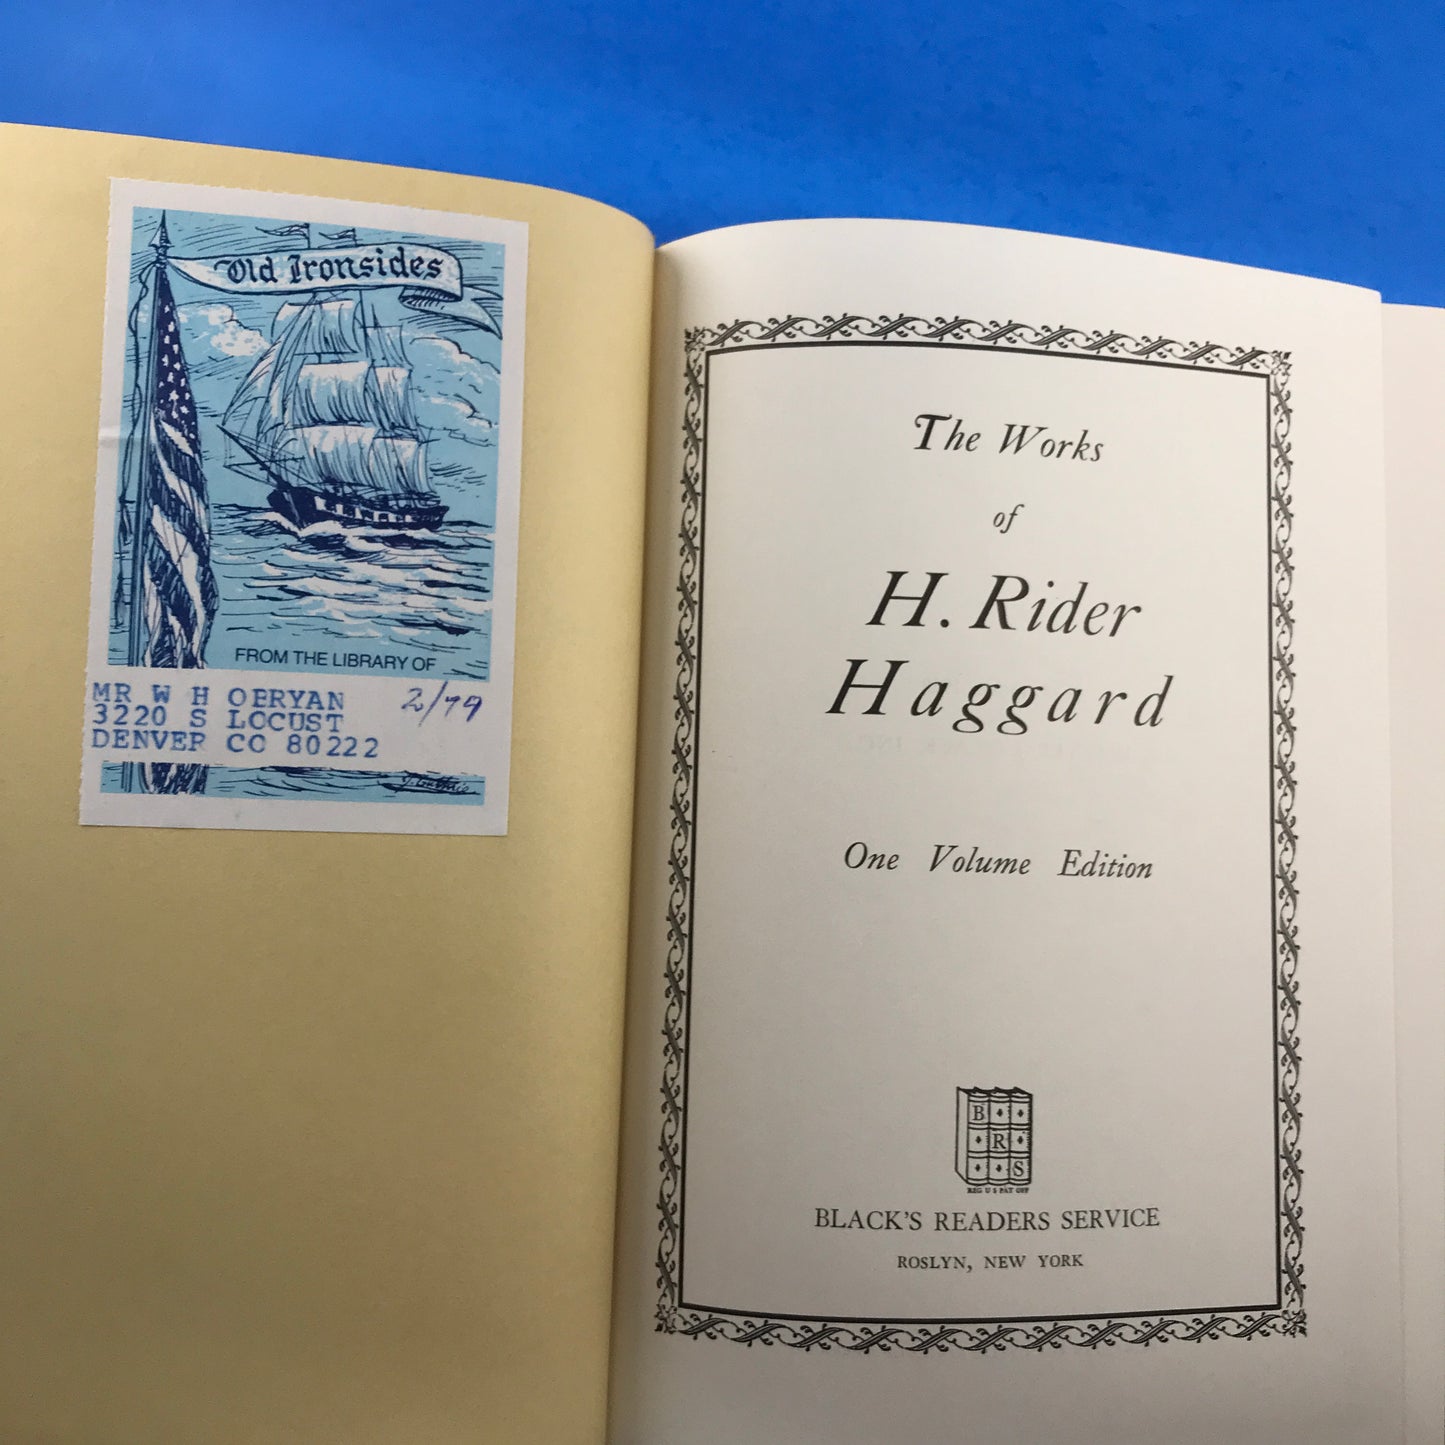 The Works of H. Rider Haggard